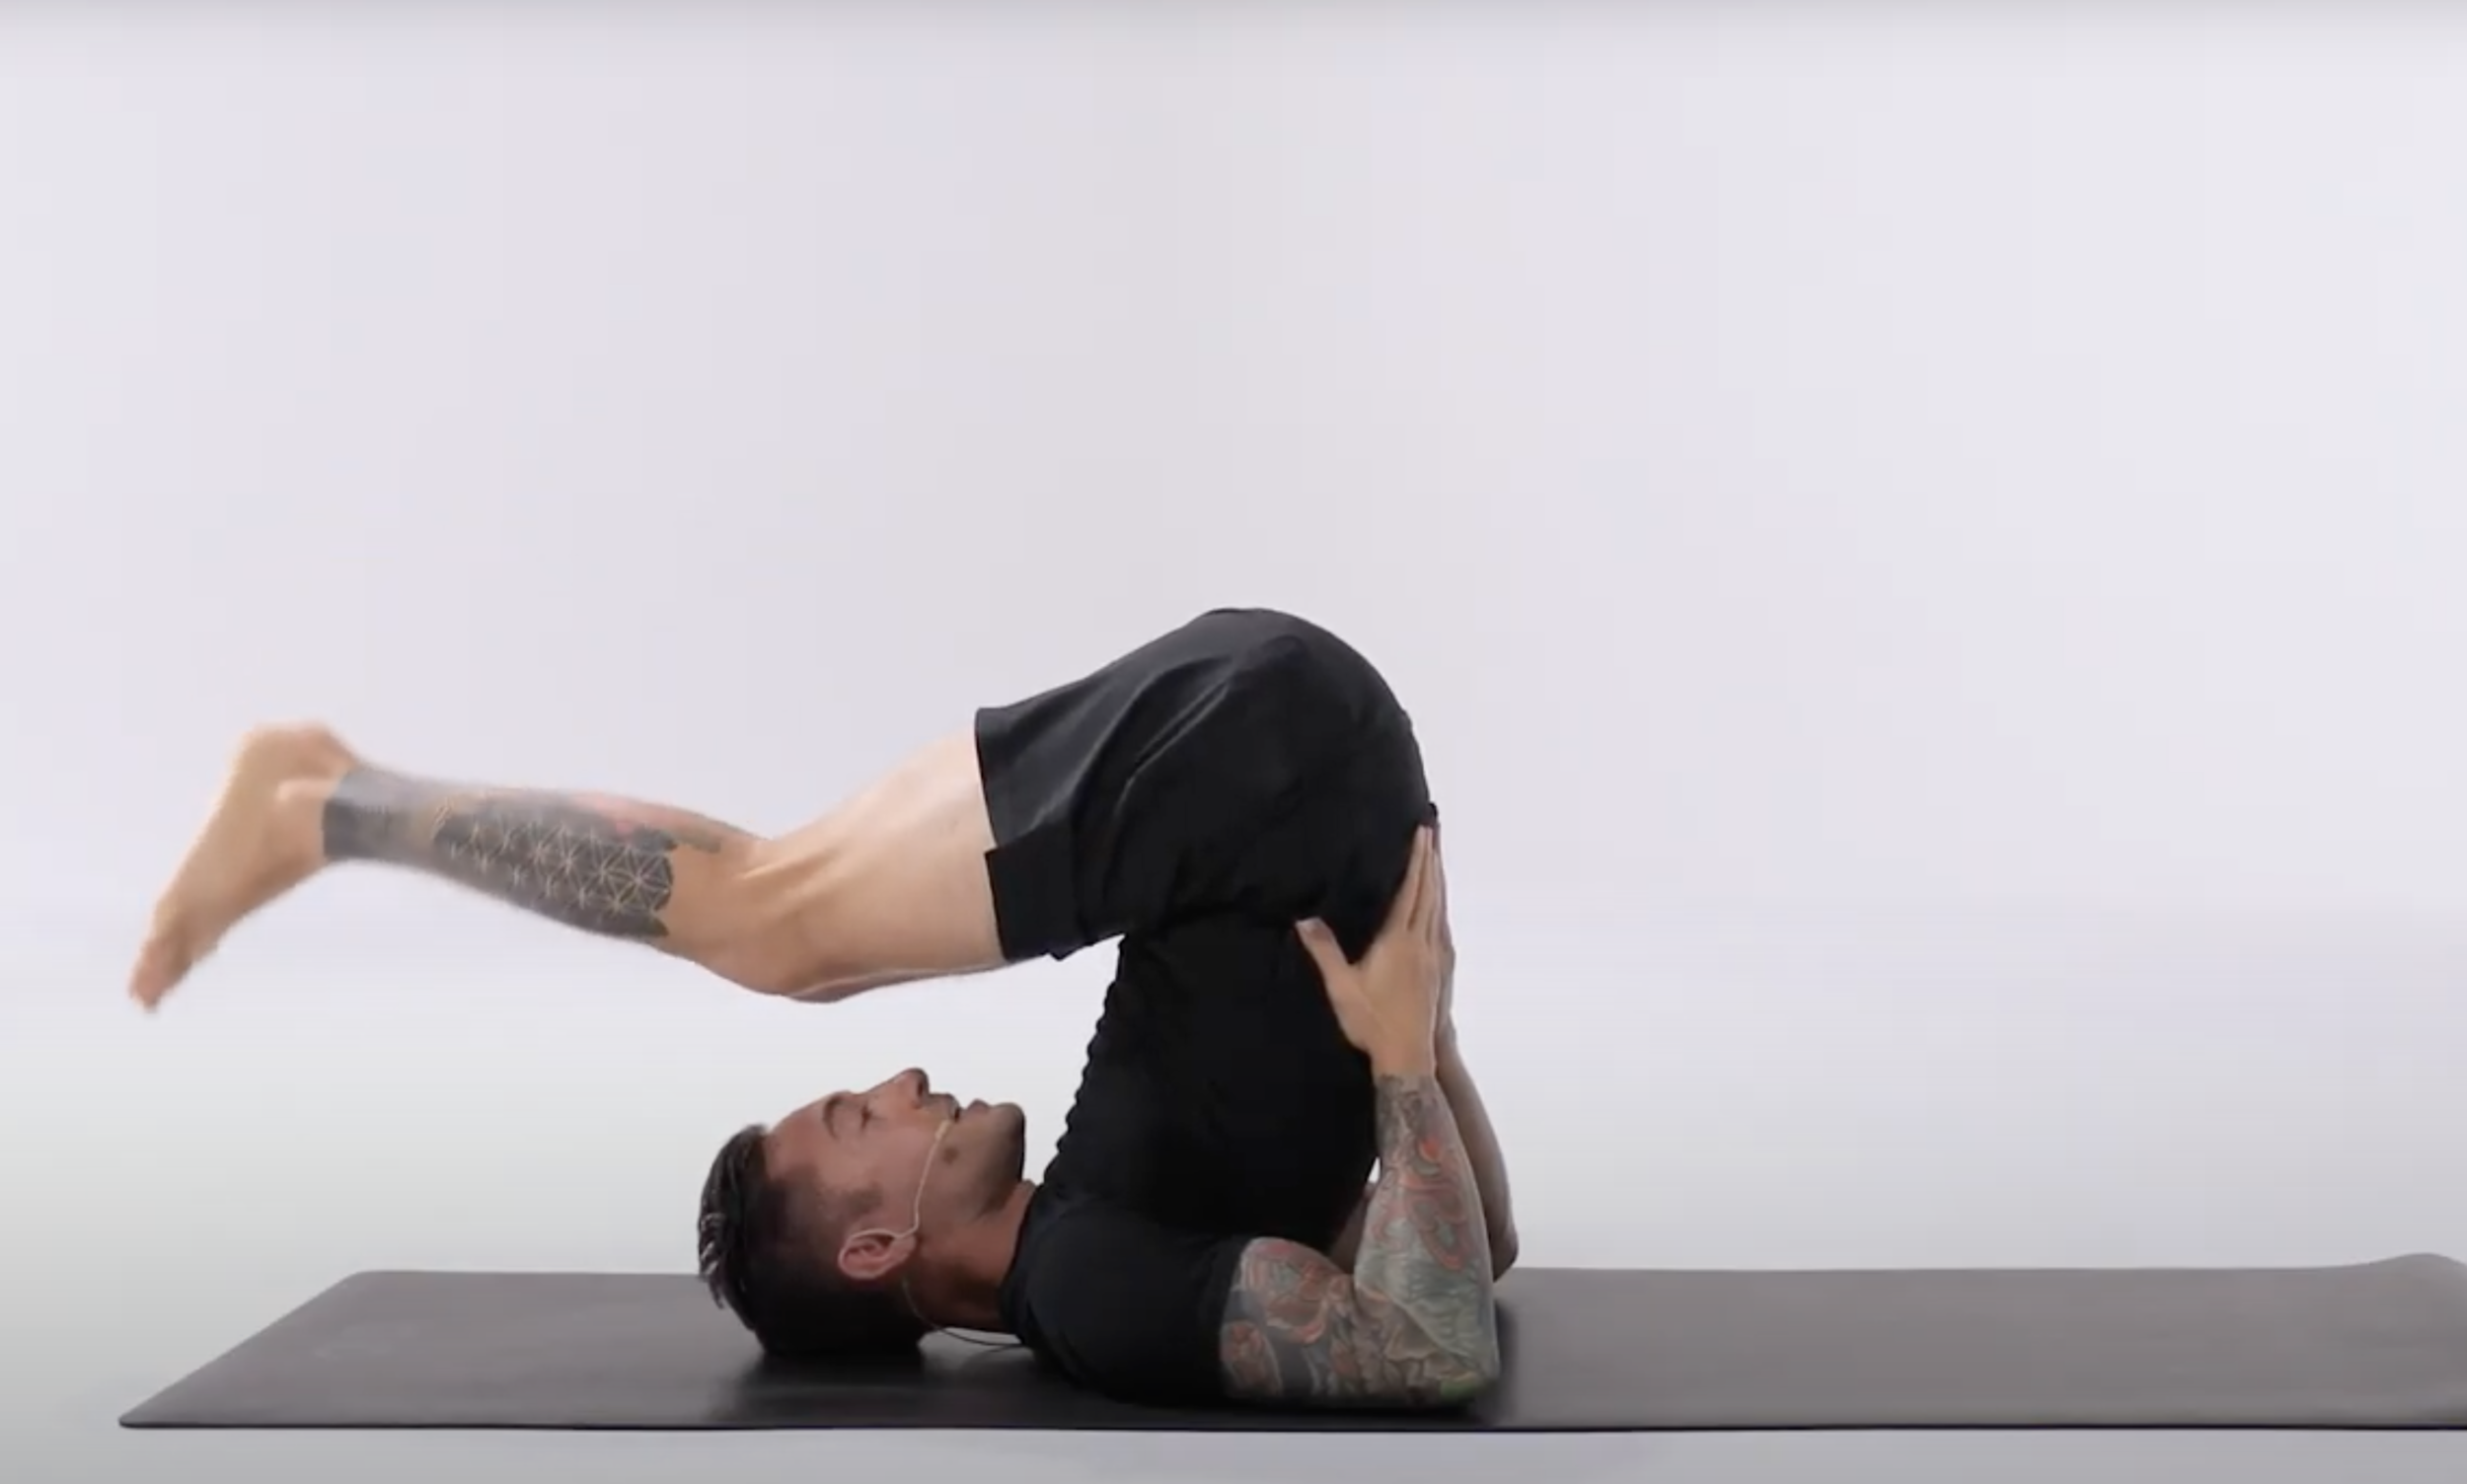 How Can I Modify My Plow Pose If I Have Big Breasts? - DoYou